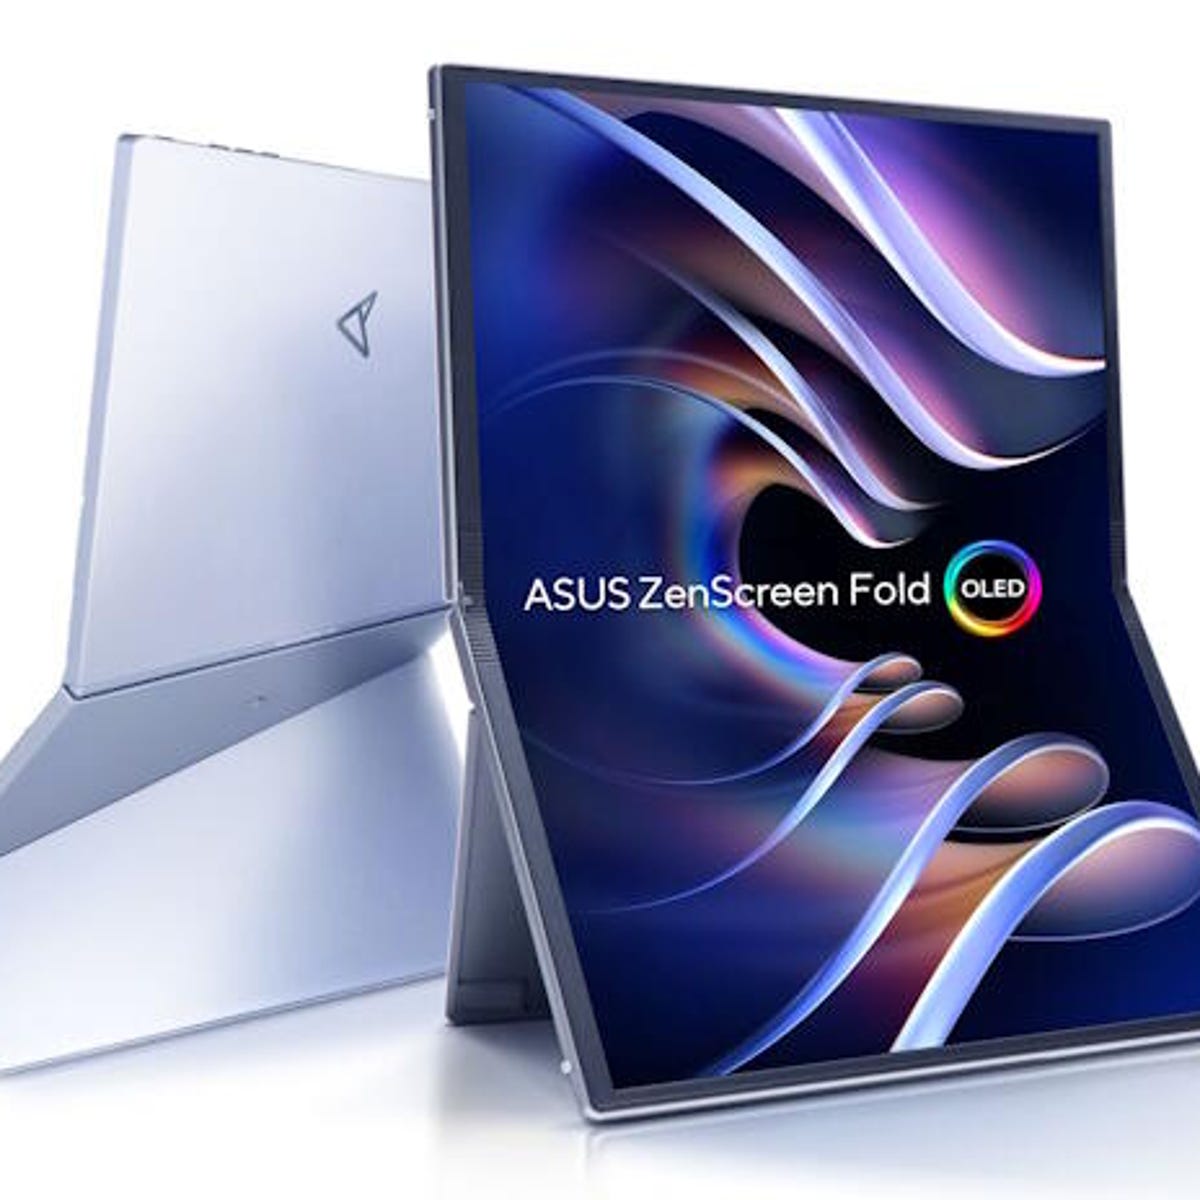 Asus' ZenScreen Fold OLED Fits a Big Display in a Small Package - CNET